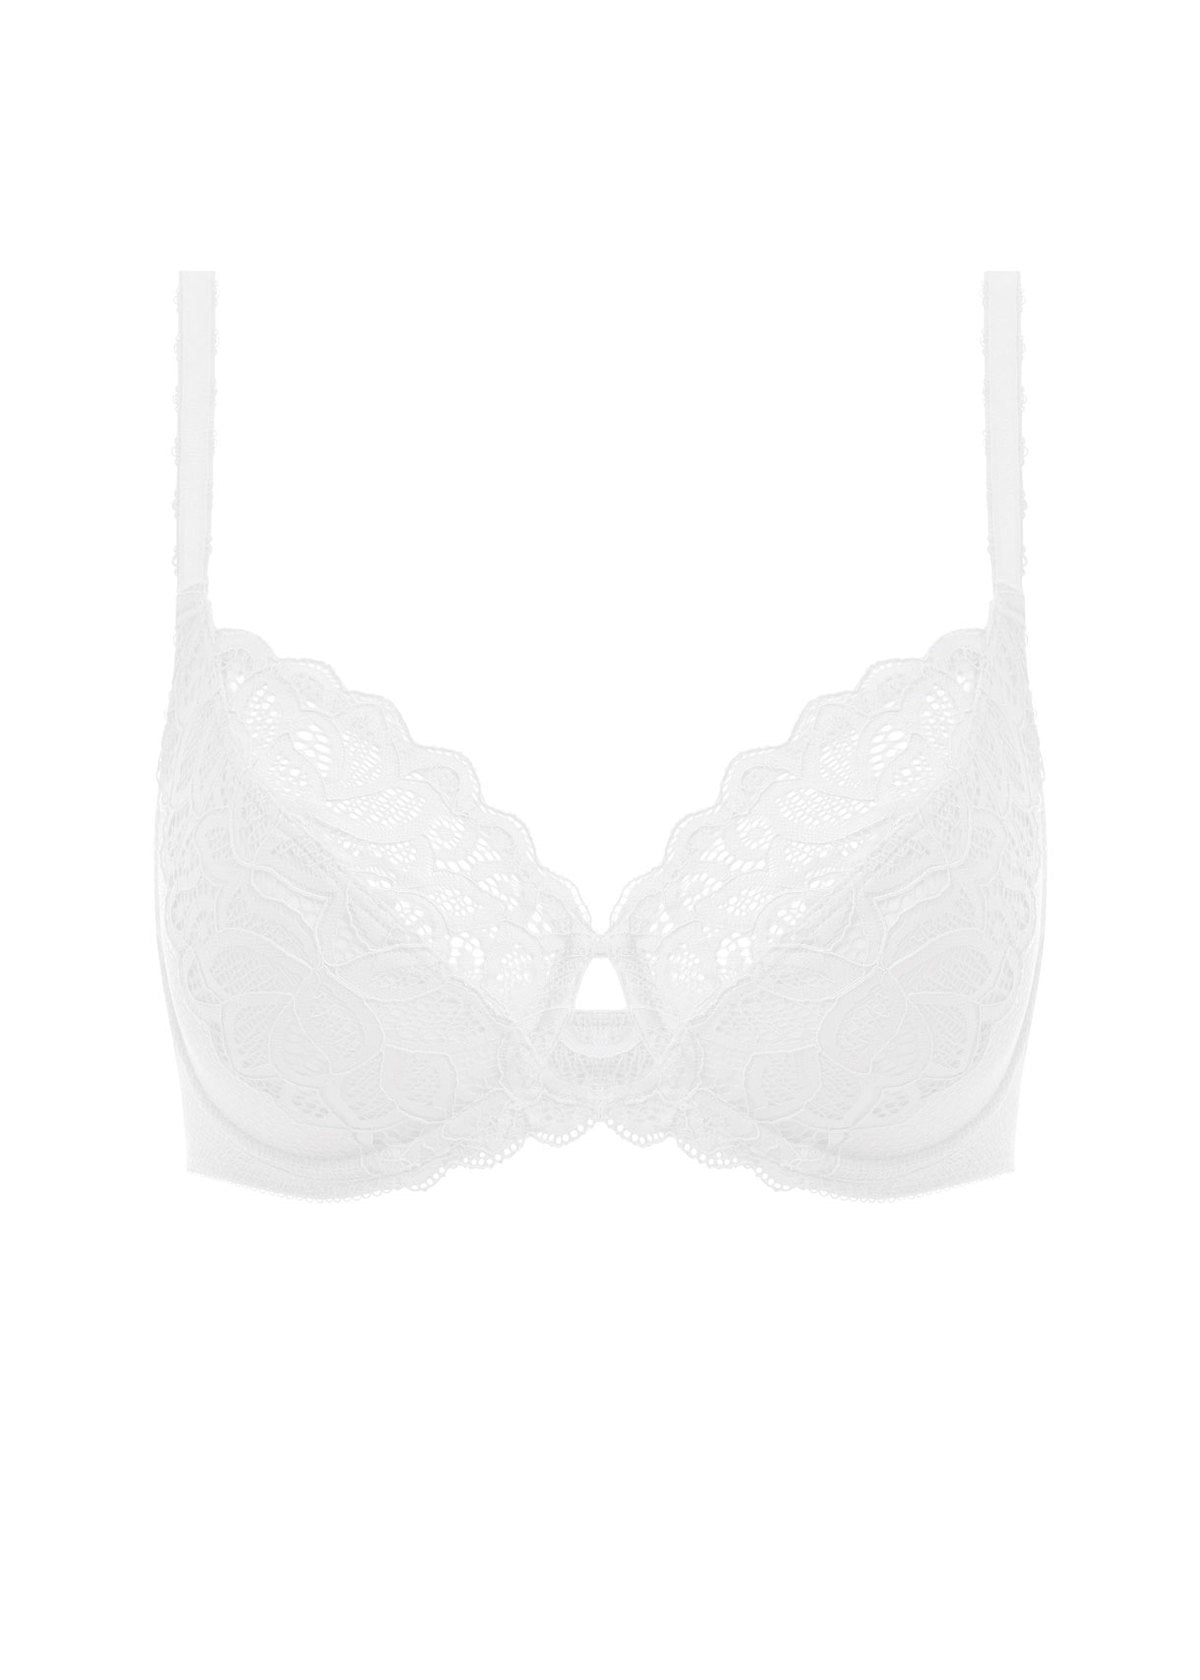 WACOAL Lace perfection Classic Underwire Bra - Botanical Green